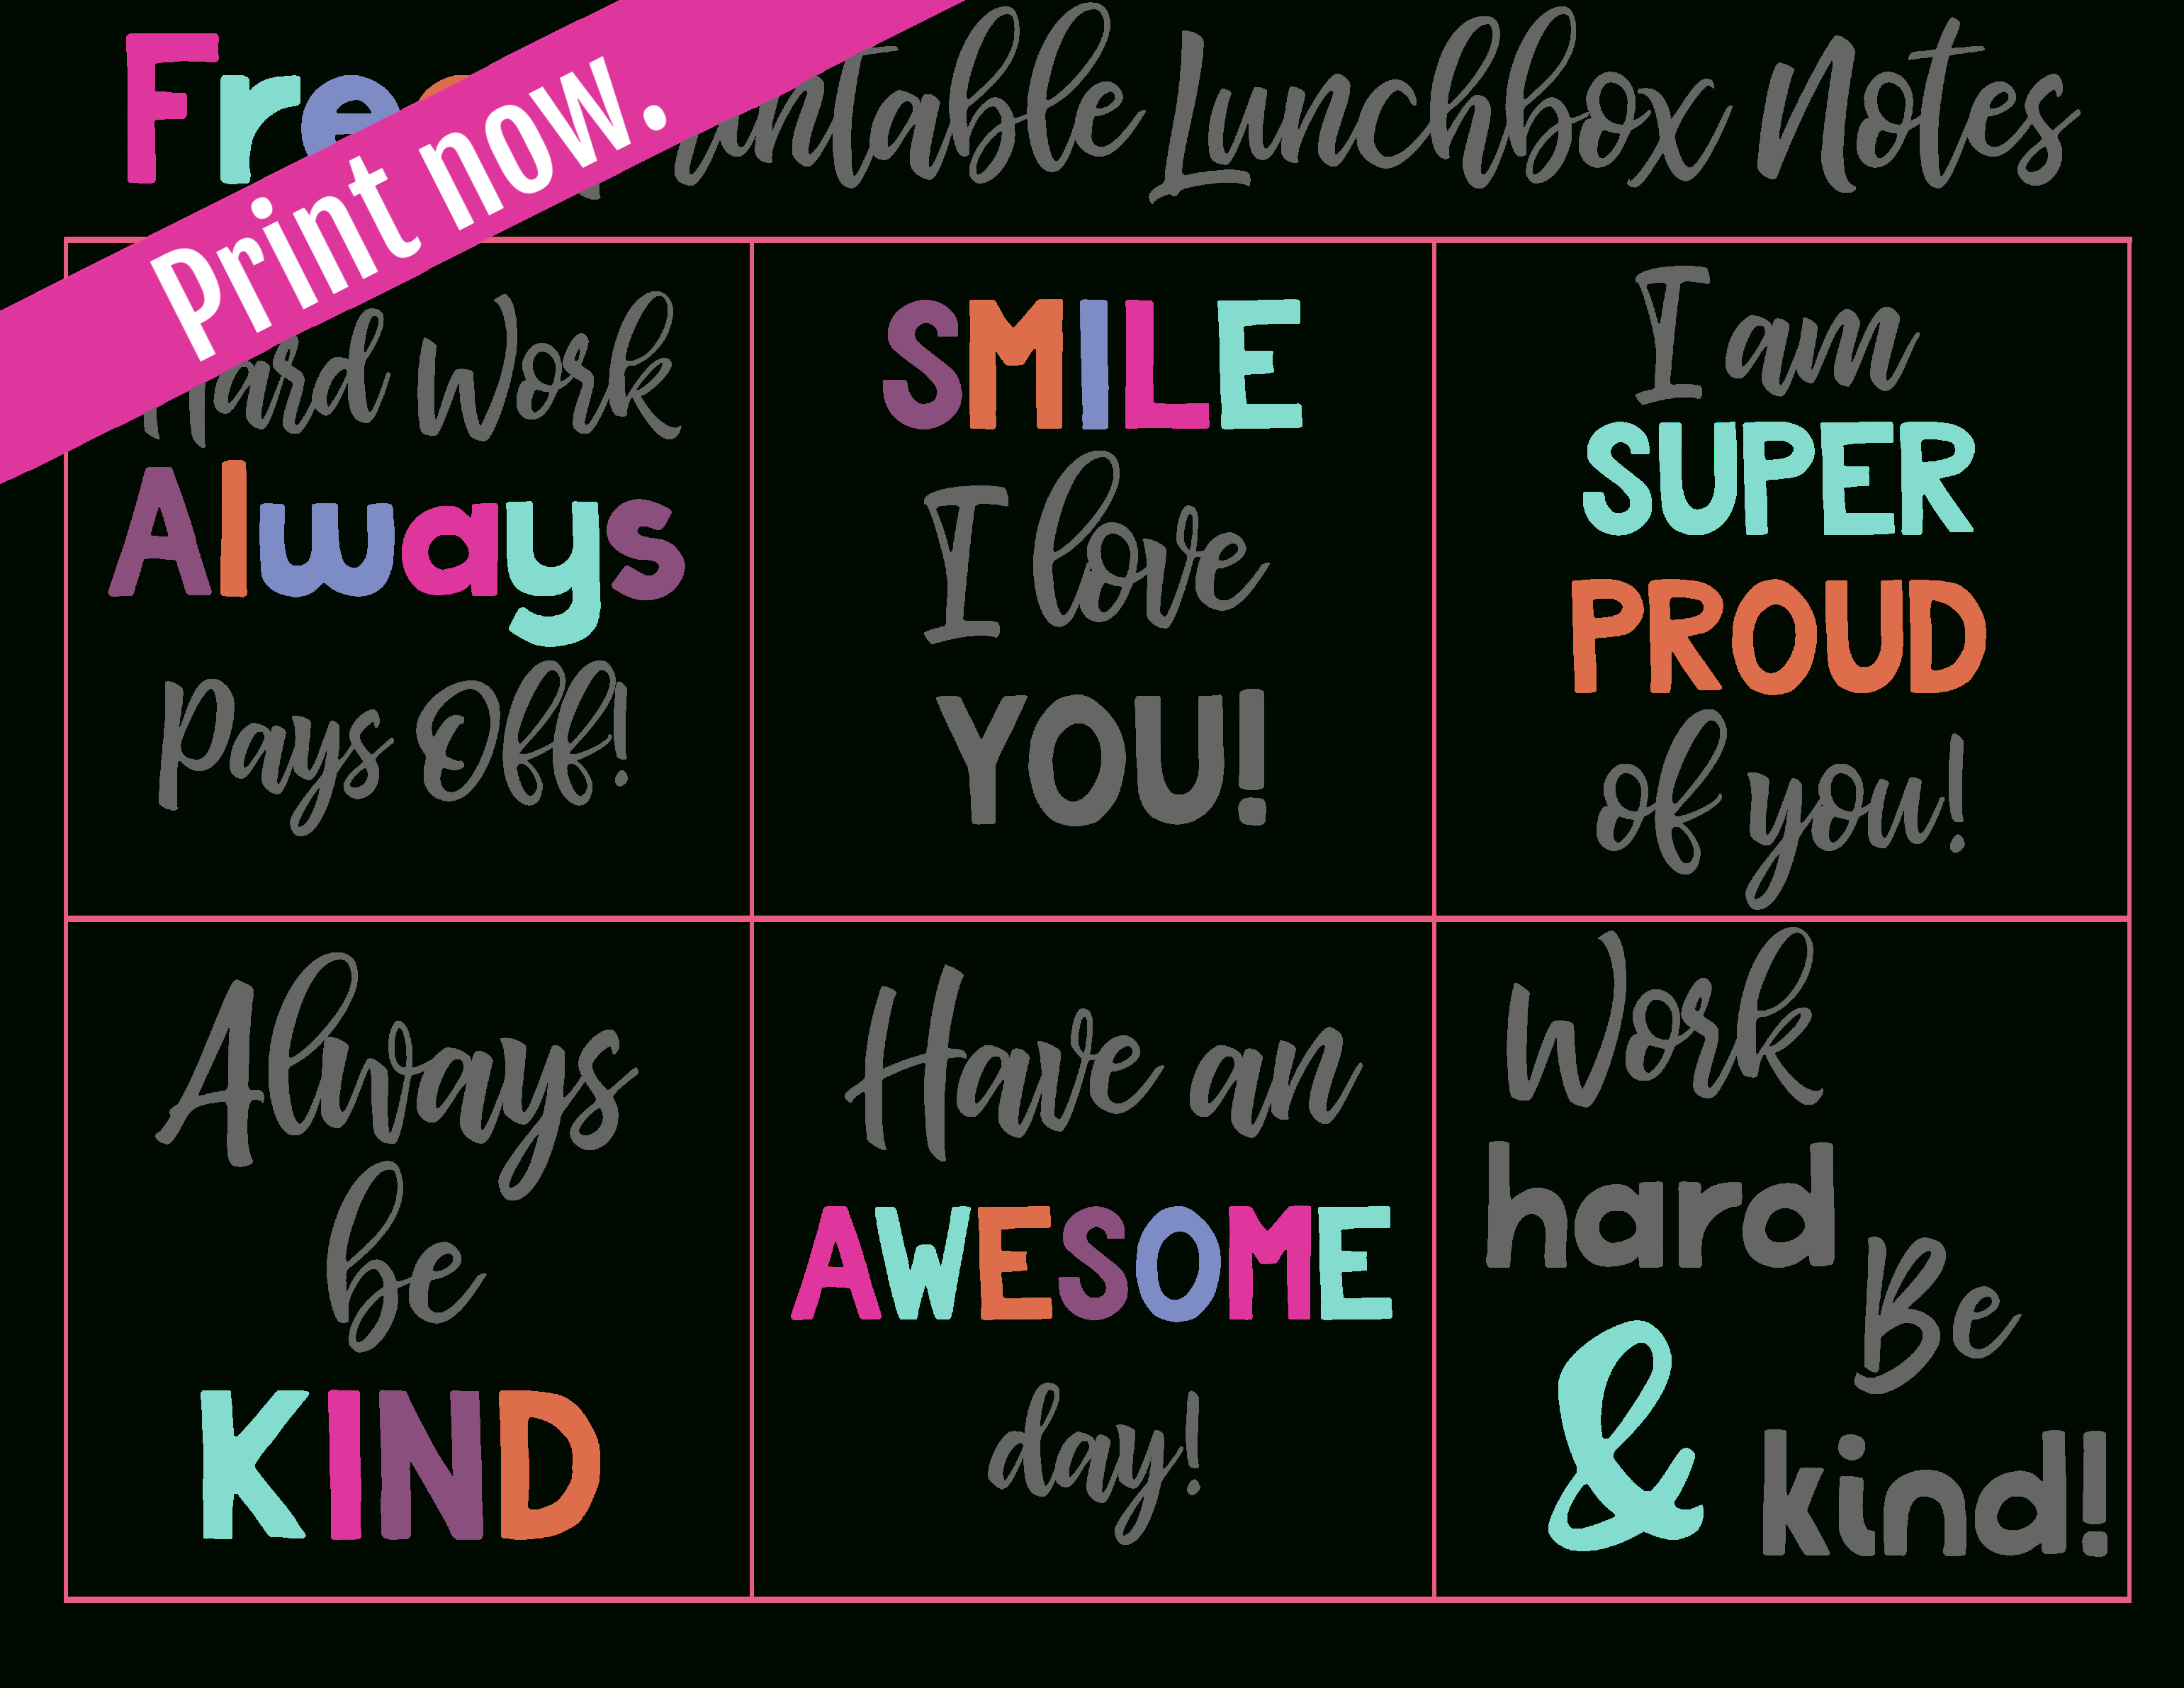 Free Printable Lunchbox Notes | Simply Being Mommy | Free Printables - Free Printable Lunchbox Notes